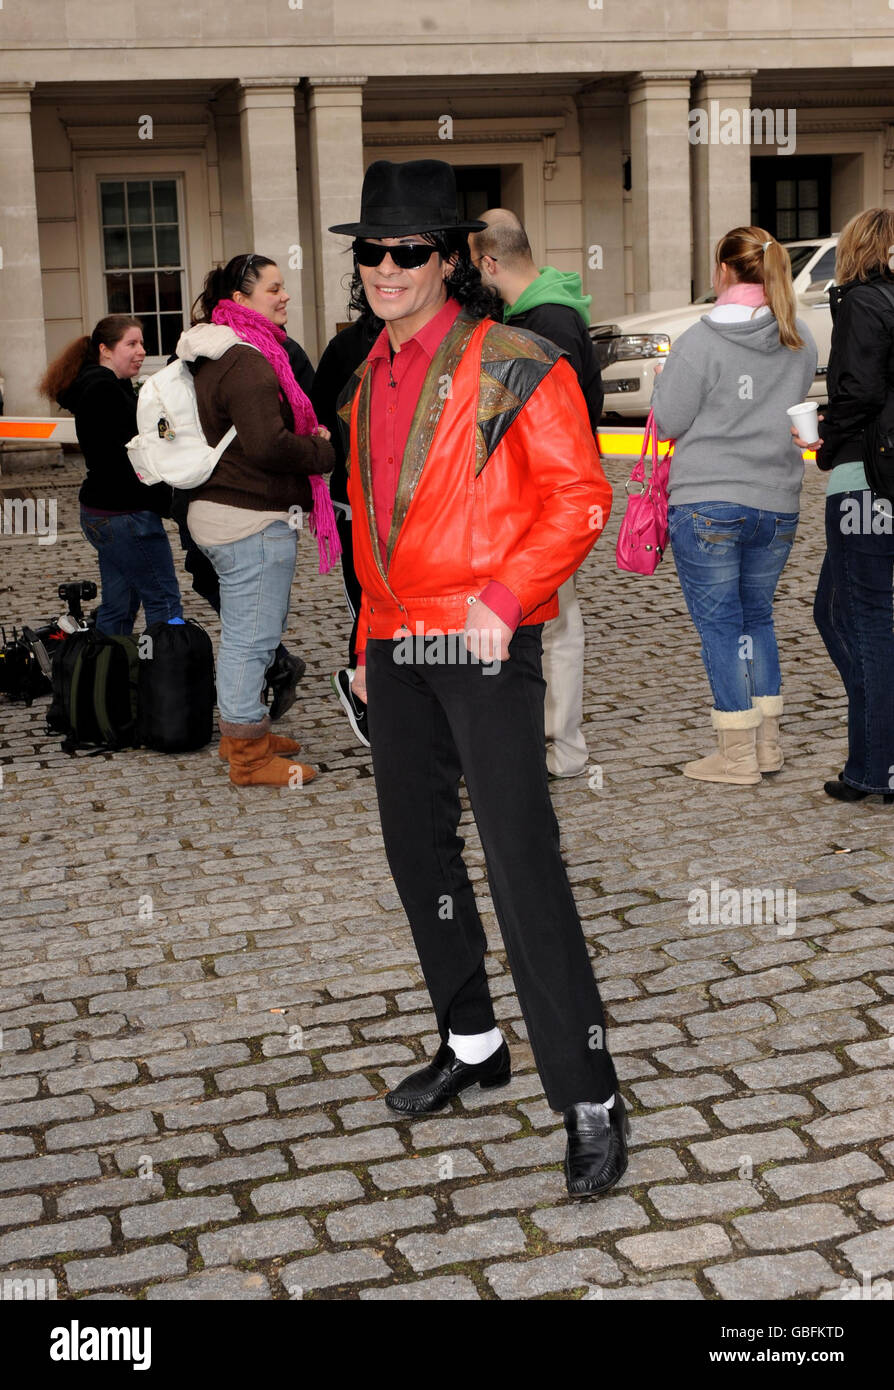 A Michael Jackson look-a-like entertains waiting fans outside the Lanesborough Hotel in central London where pop star Michael Jackson is rumoured to be staying. Stock Photo